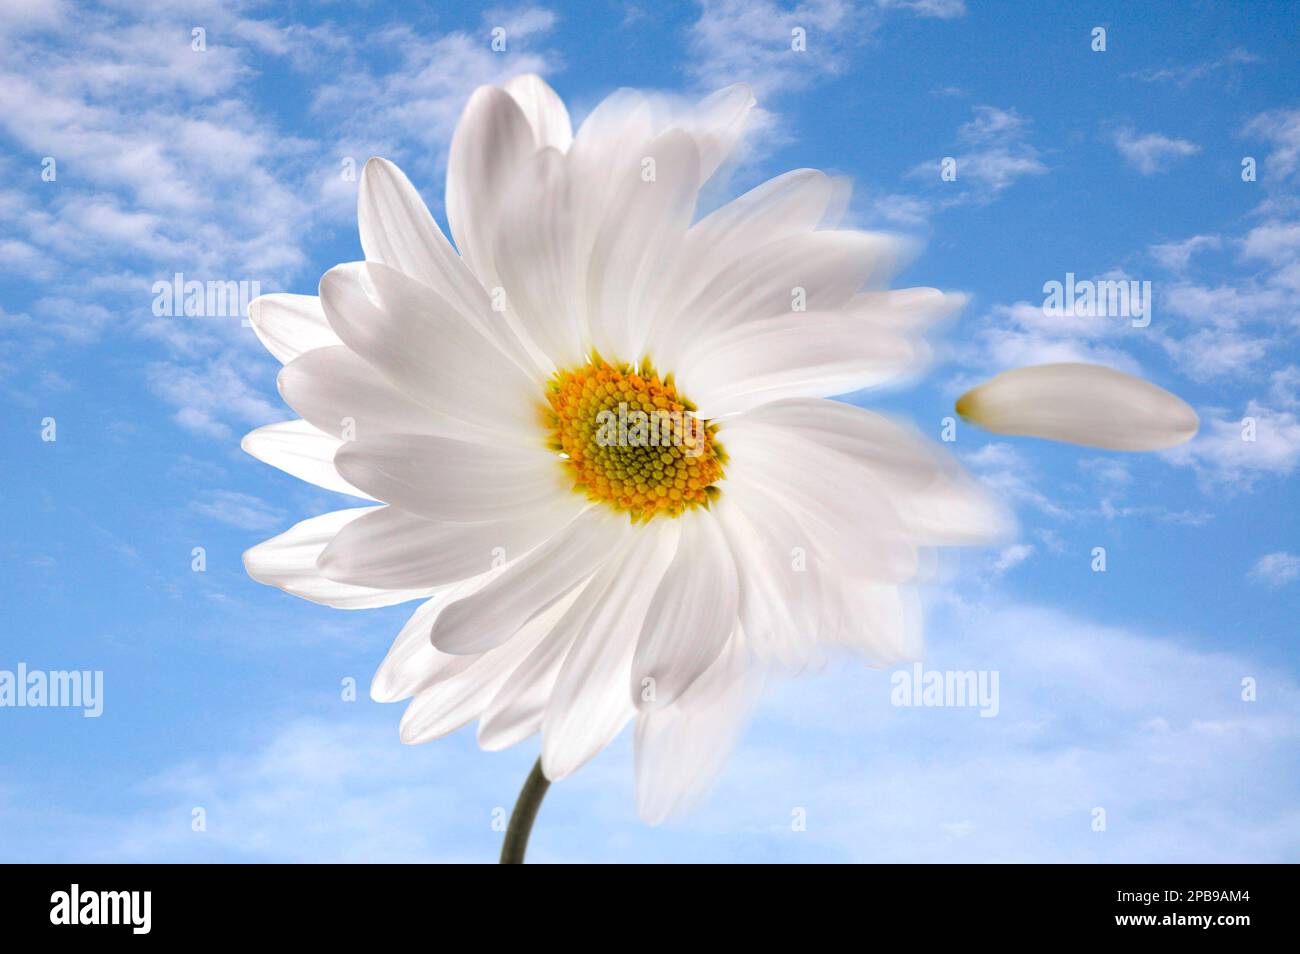 A daisy being blown by the wind, on a beautiful day with blue clouded sky Stock Photo